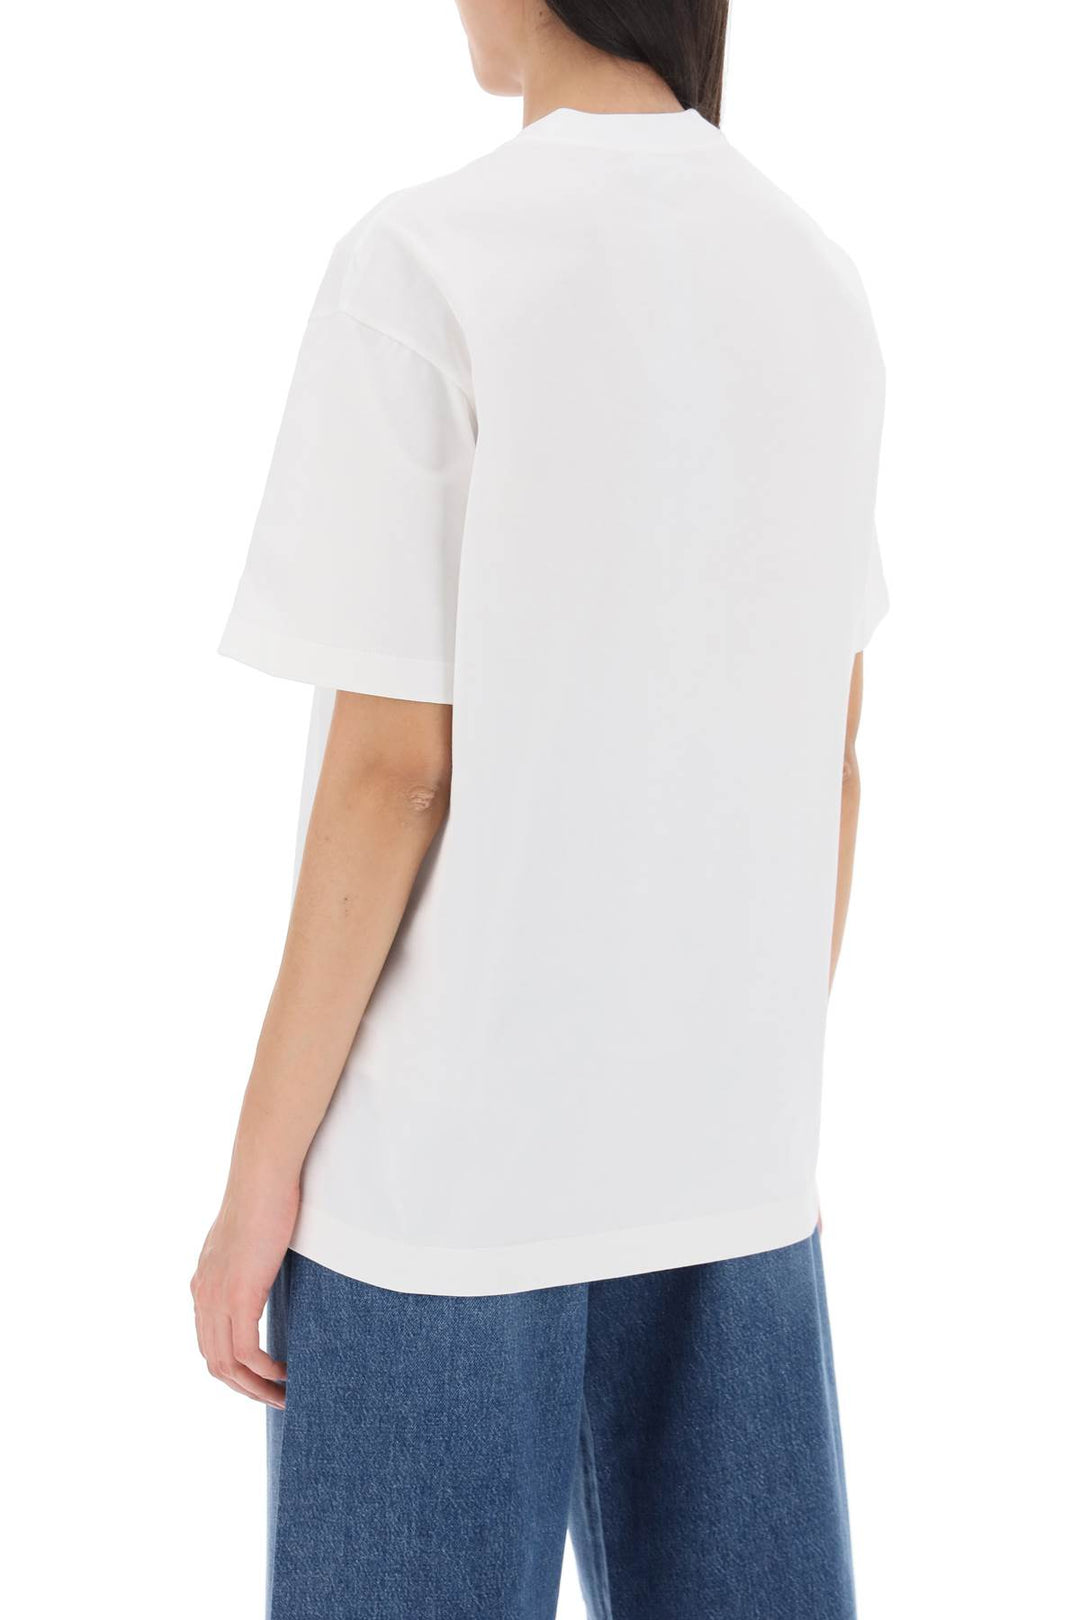 Etro Floral Pegasus Embroidered T Shirt   Bianco